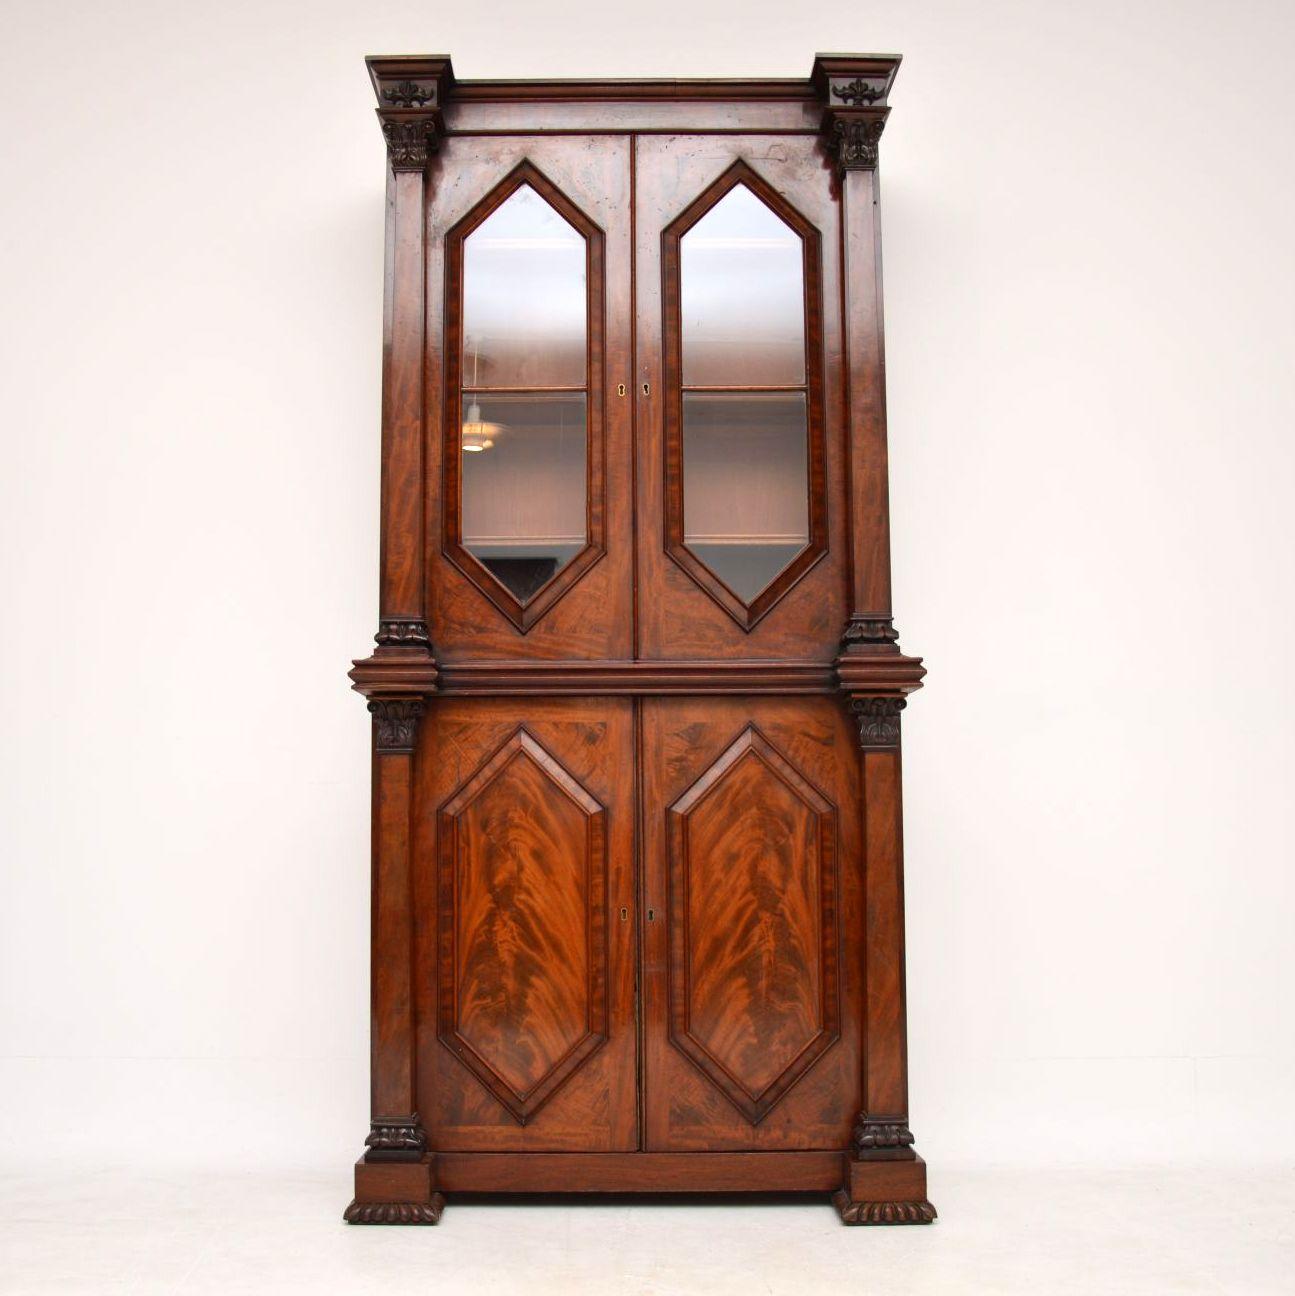 Very high quality and unusually designed antique William IV period mahogany two section bookcase. It’s all original, from the 1830-1837 period and is in excellent condition. The front section is all flame mahogany, with diamond shaped bottom door